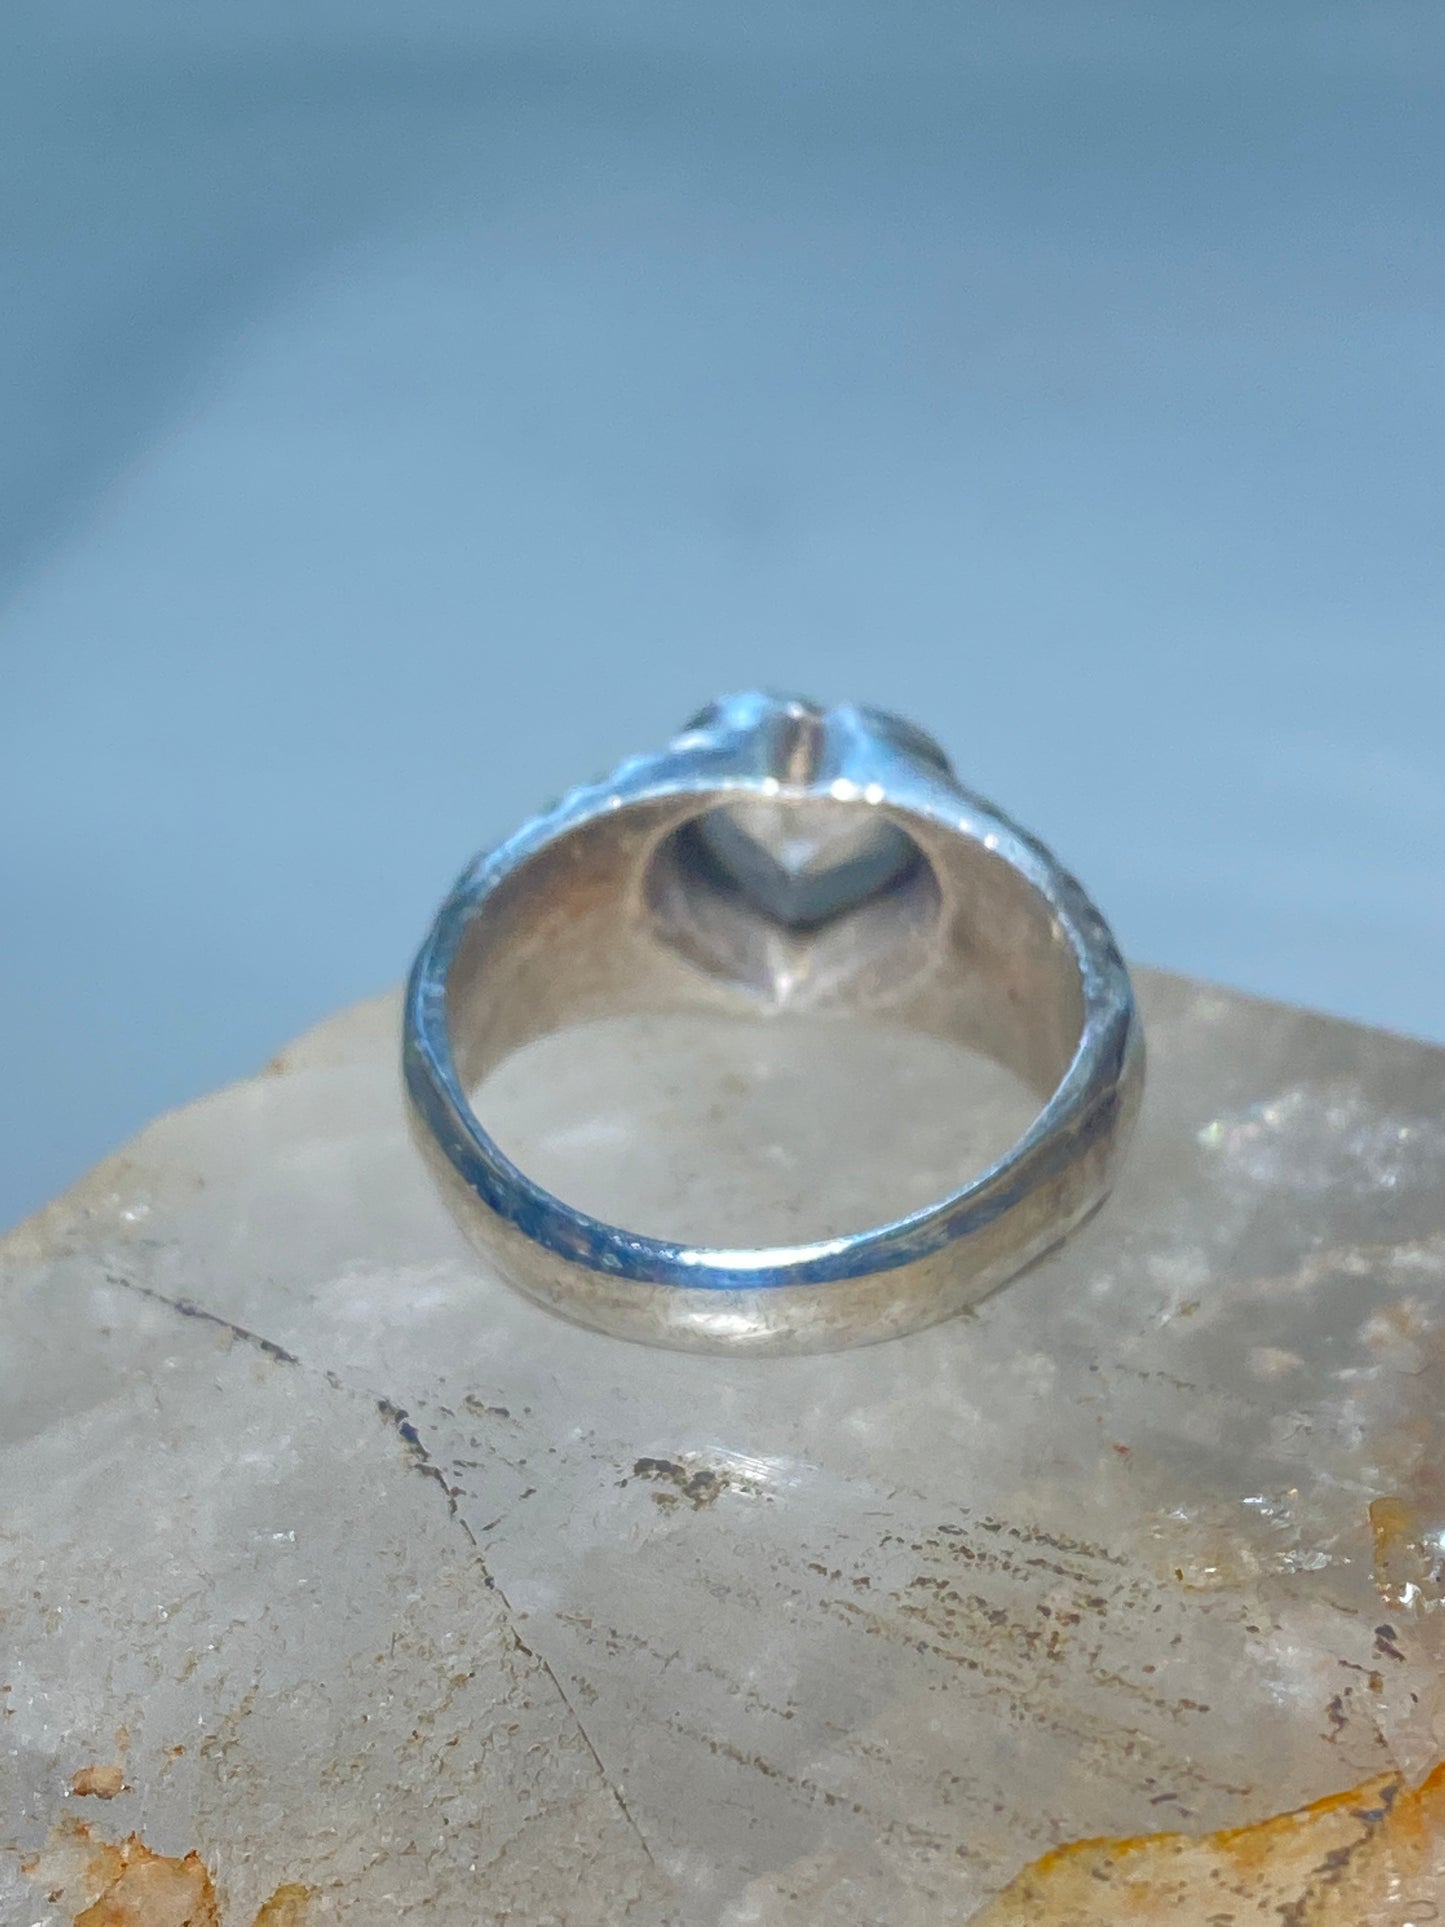 Heart ring size 7.50 love band cocktail sterling silver women